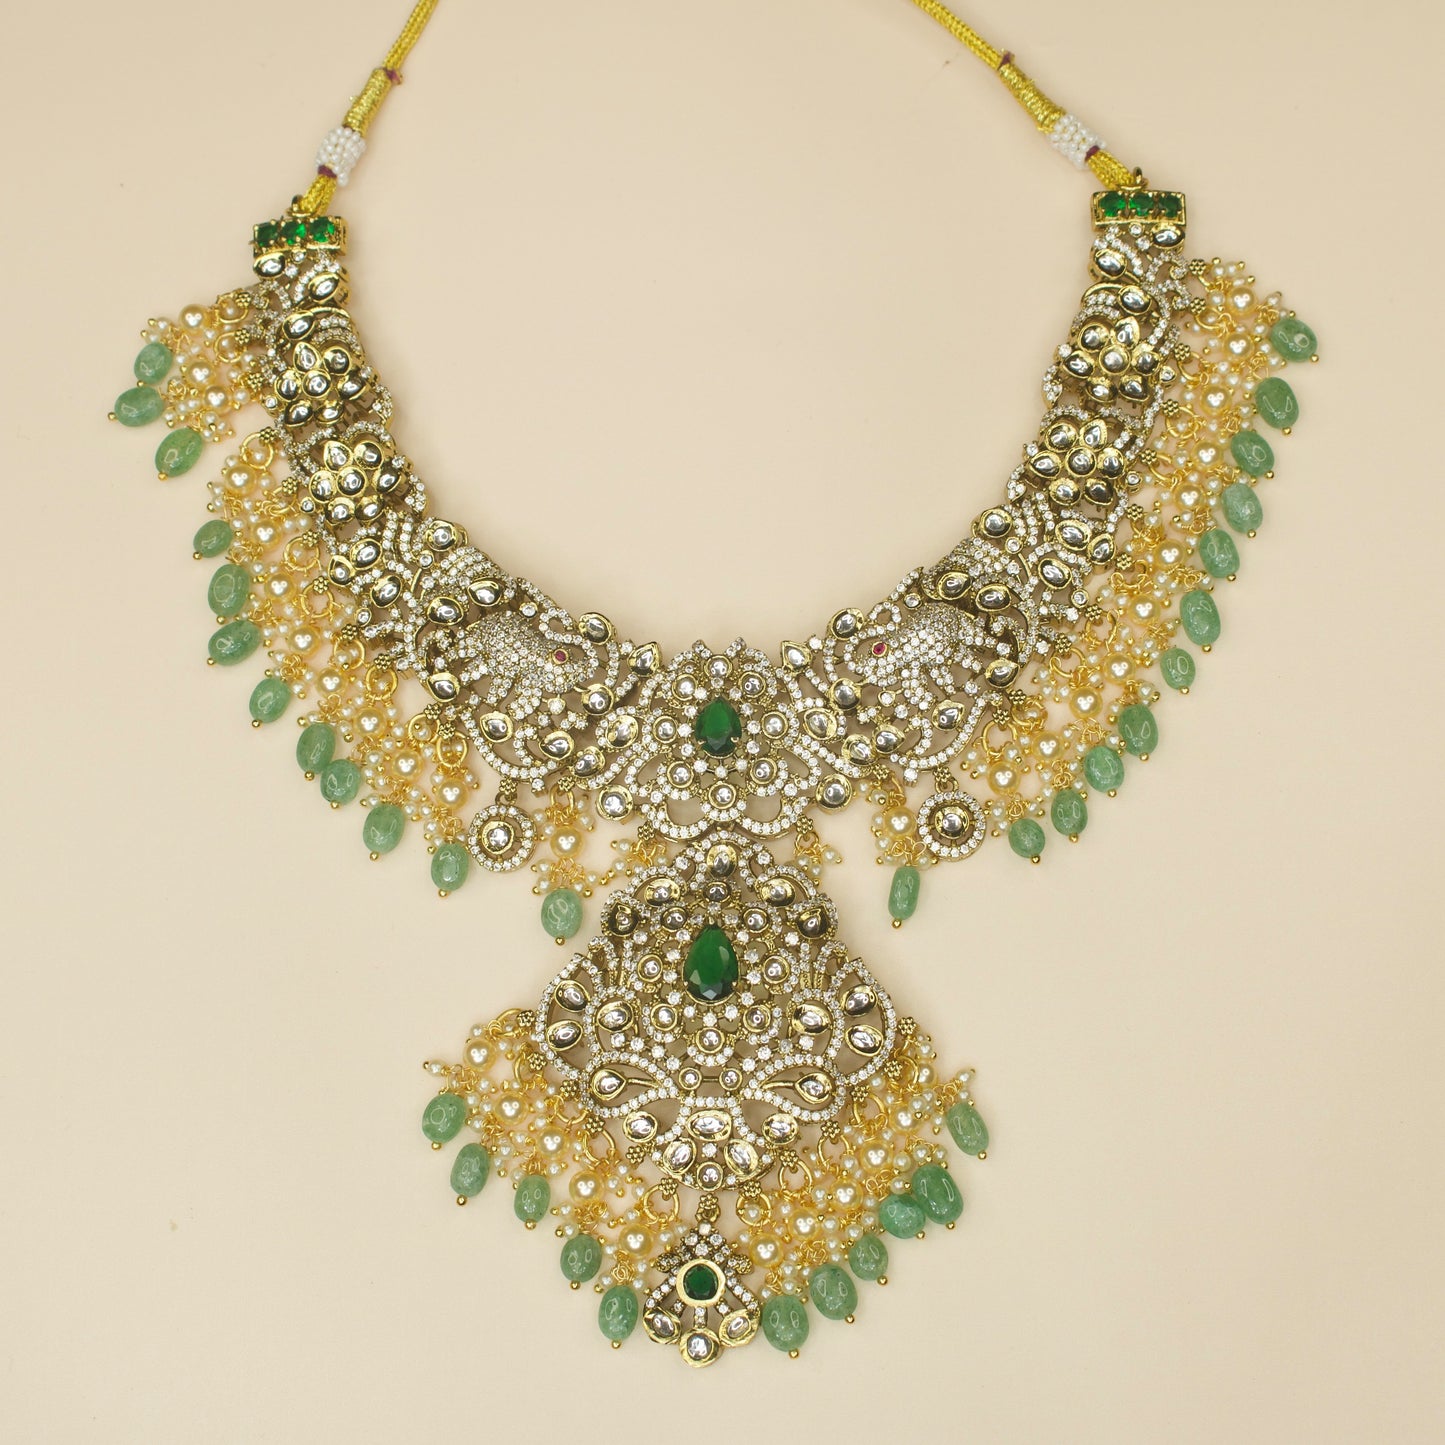 Elevating Victorian Kundan Necklace with Earrings